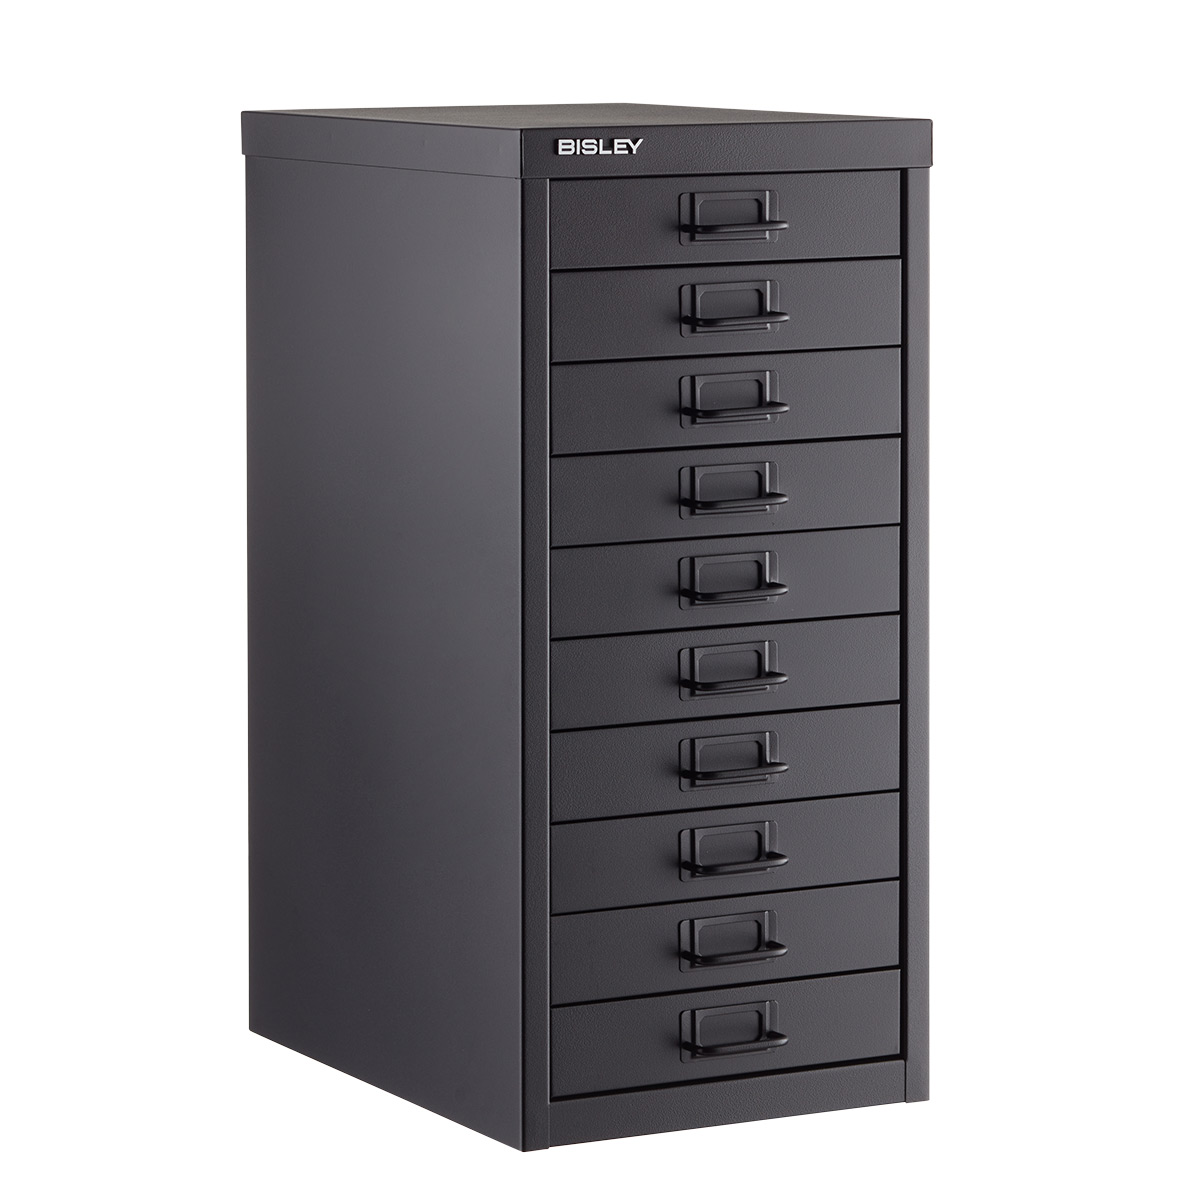 https://www.containerstore.com/catalogimages/470447/668010_Bisley_10-drawer_cabinet_blac.jpg